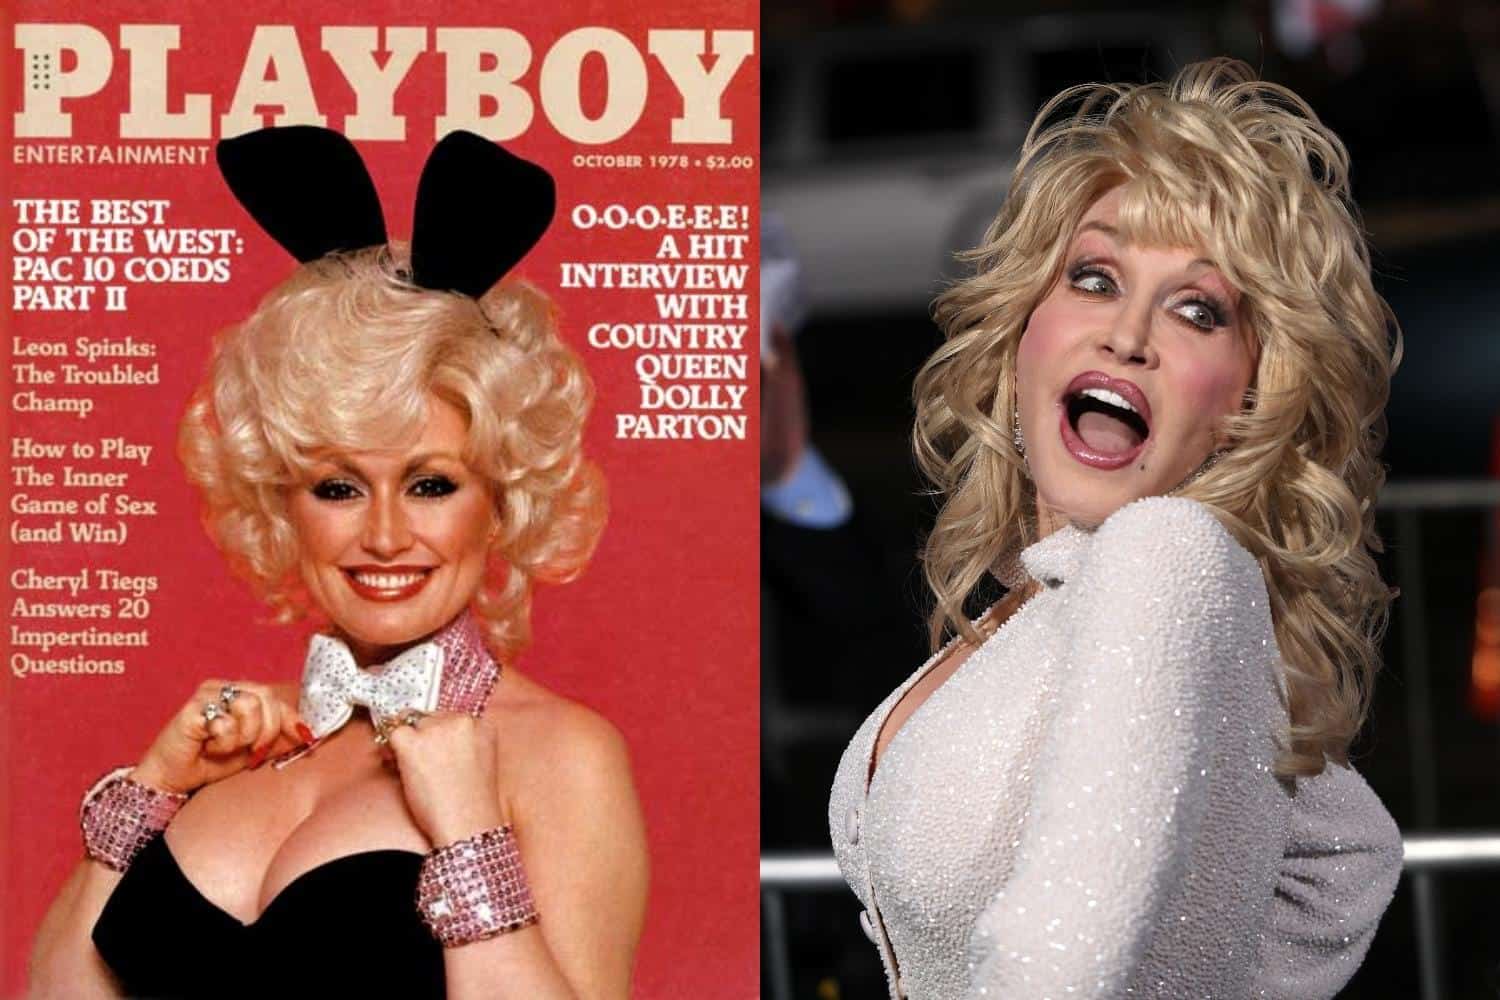 Here are several times dolly parton has made our world better simply by bei...